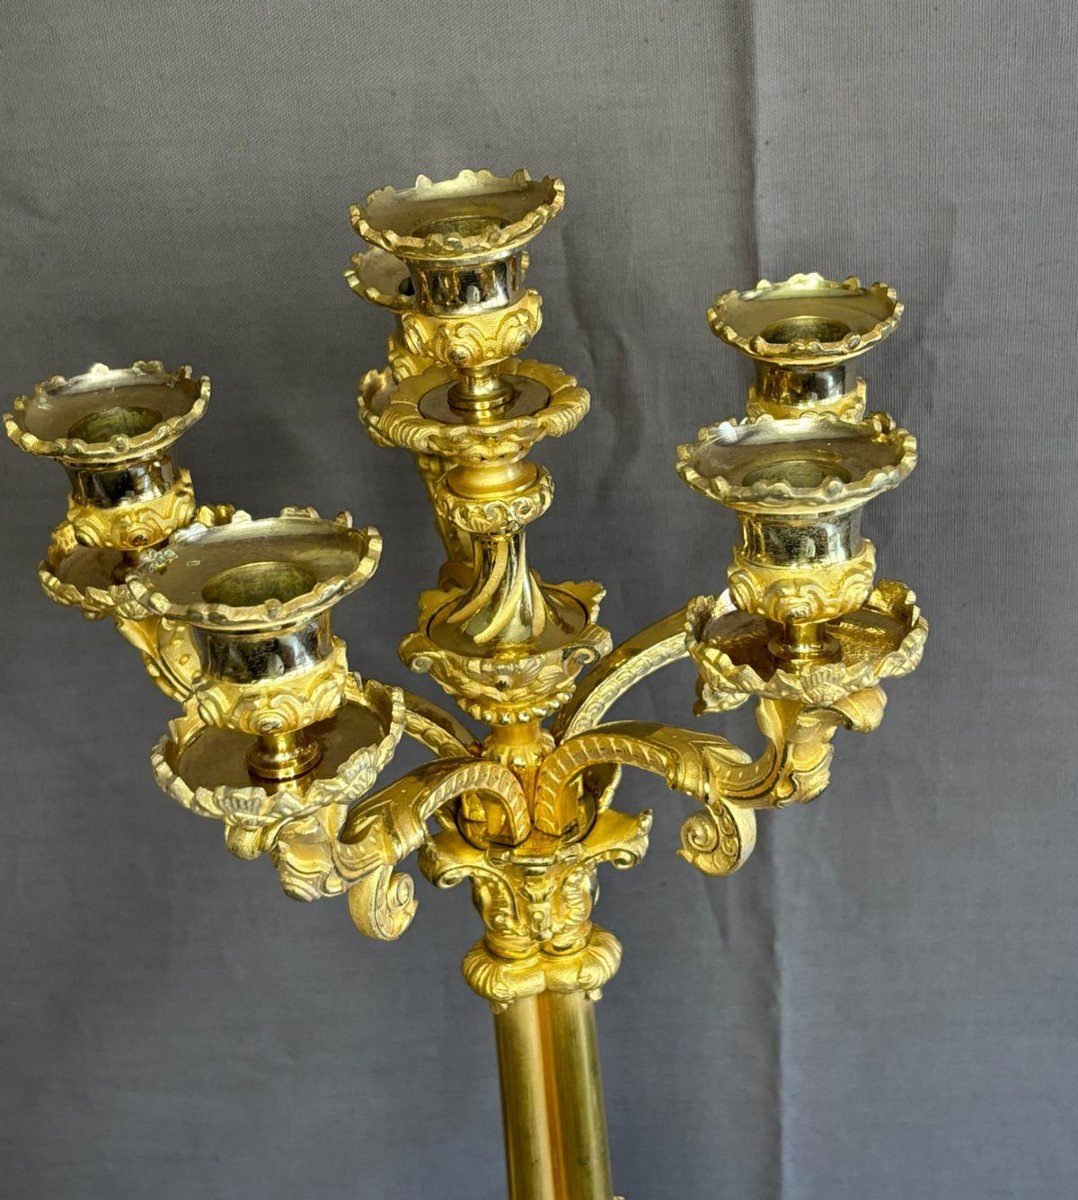 Pair Of Large Candelabras From The Louis-philippe Period From The 19th Century-photo-2